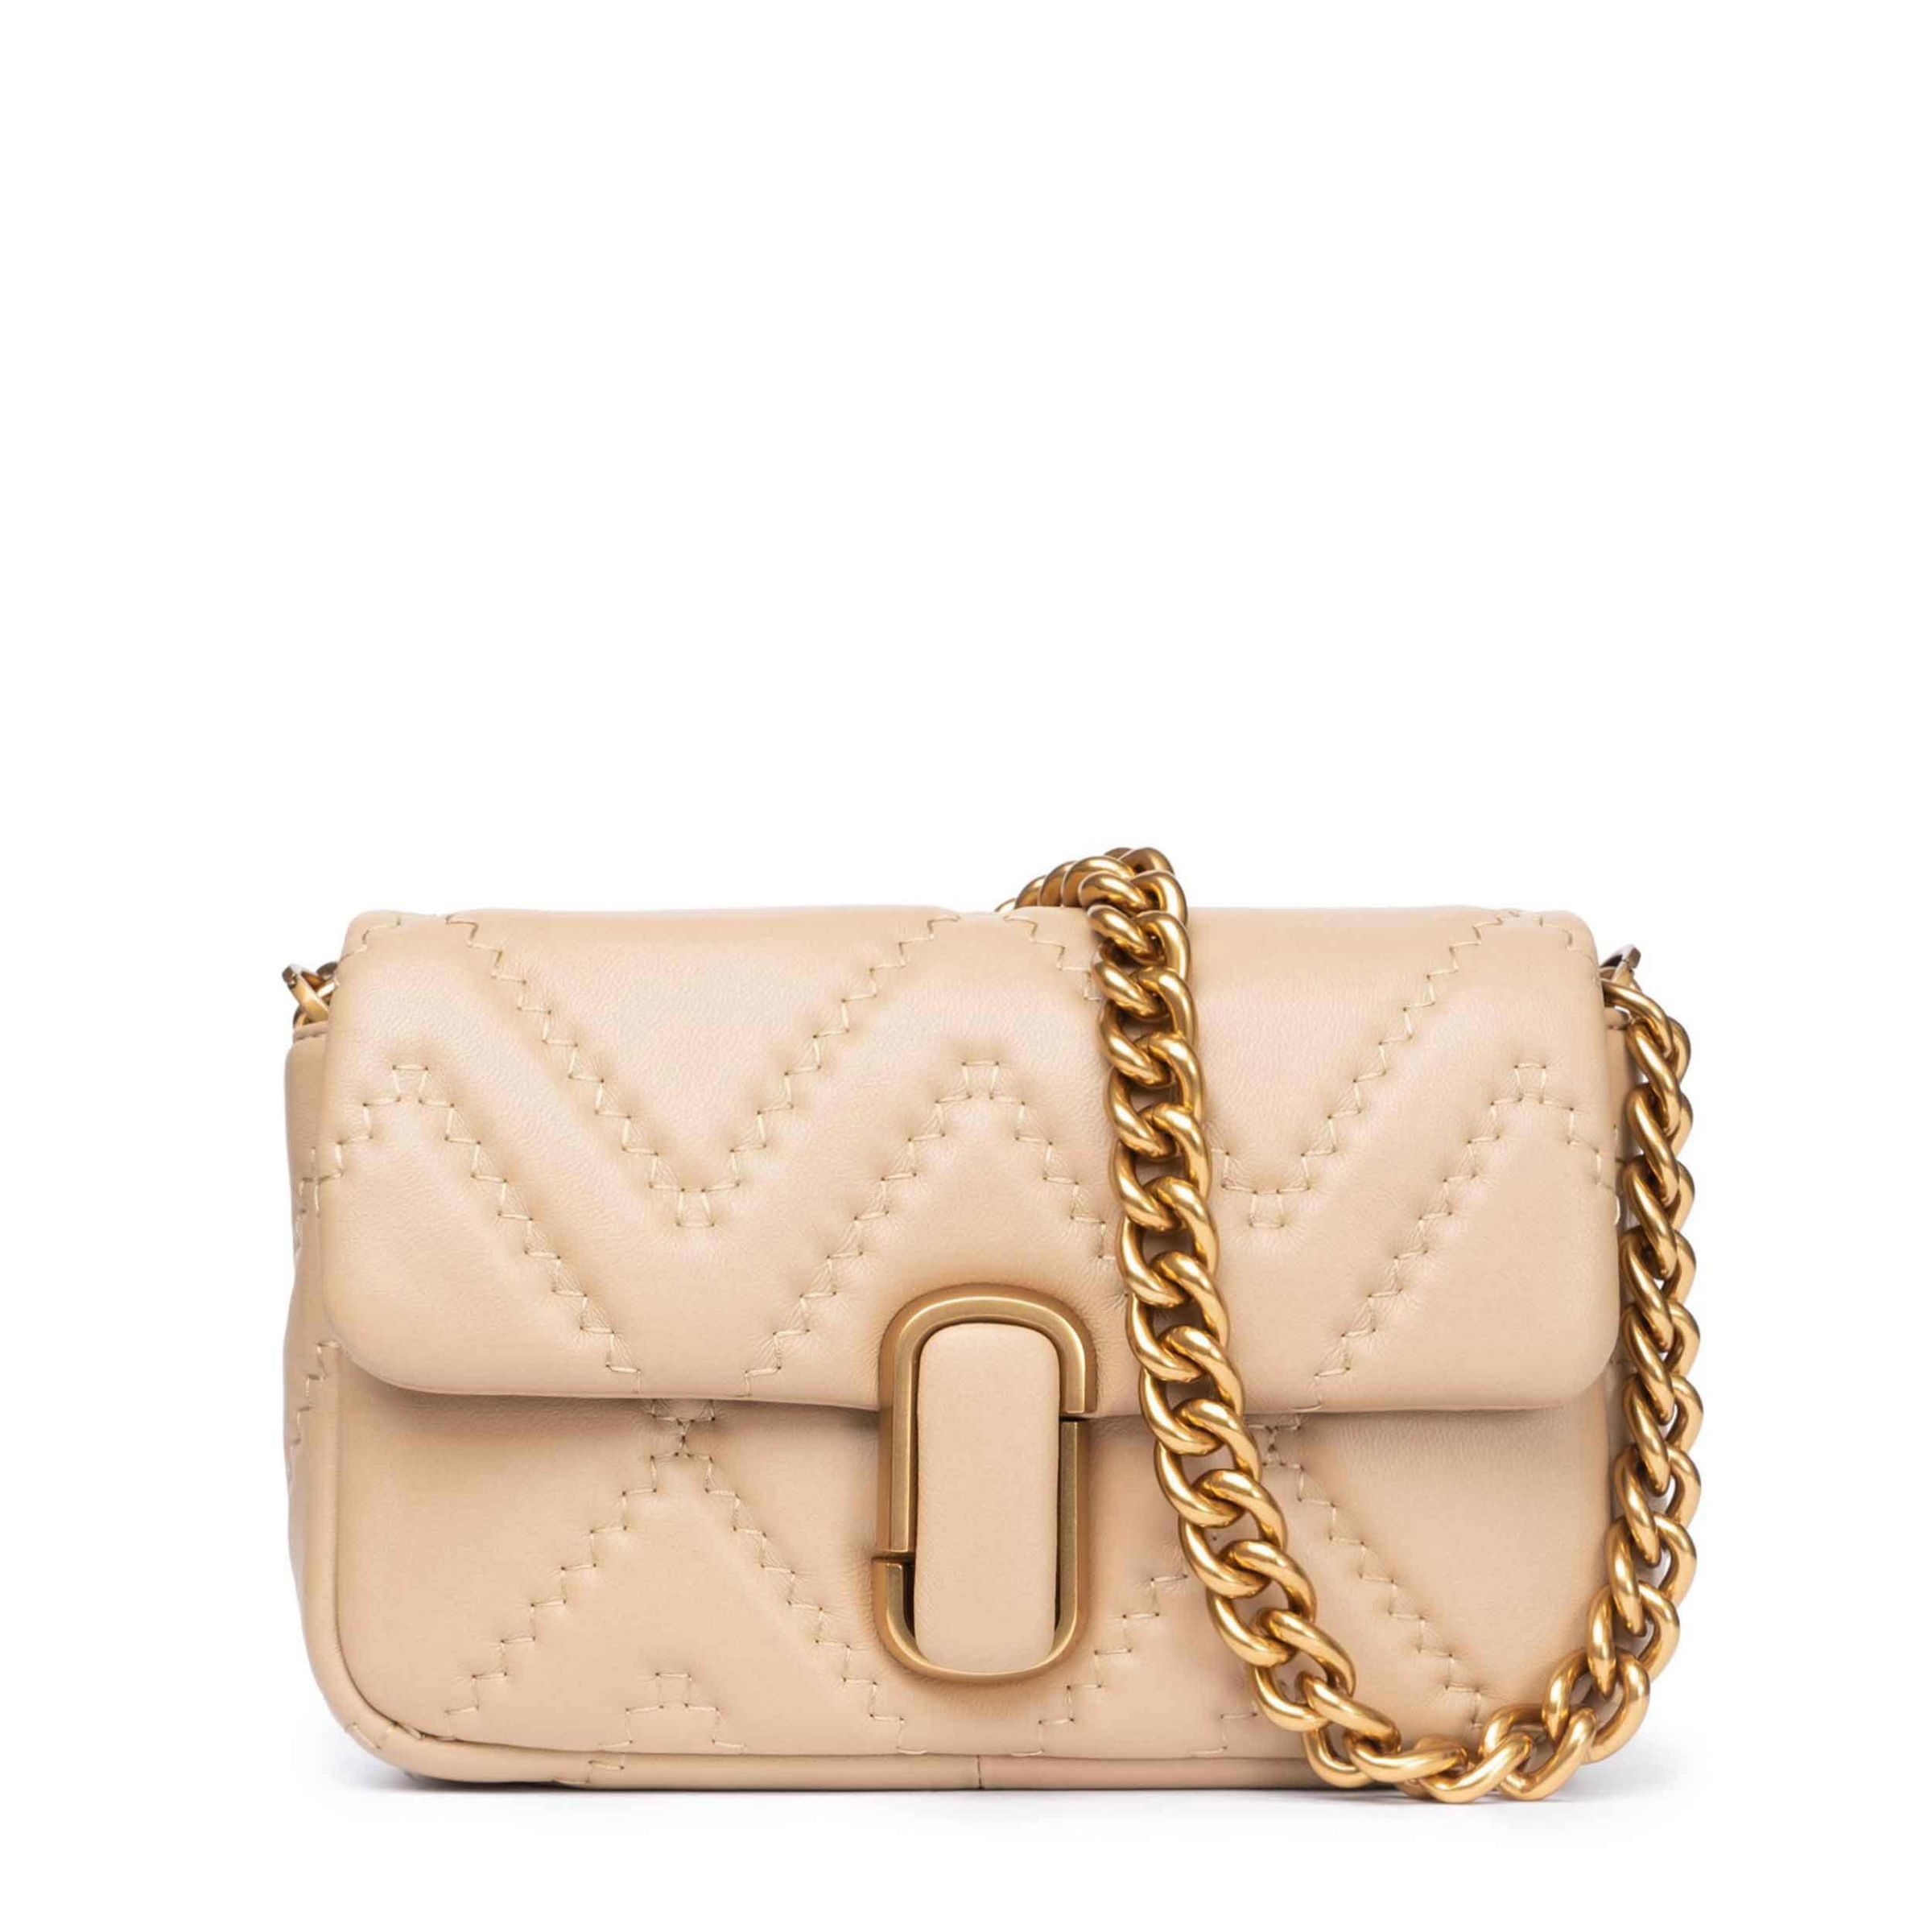 Сумка Marc Jacobs Quilted J Marc бежевая